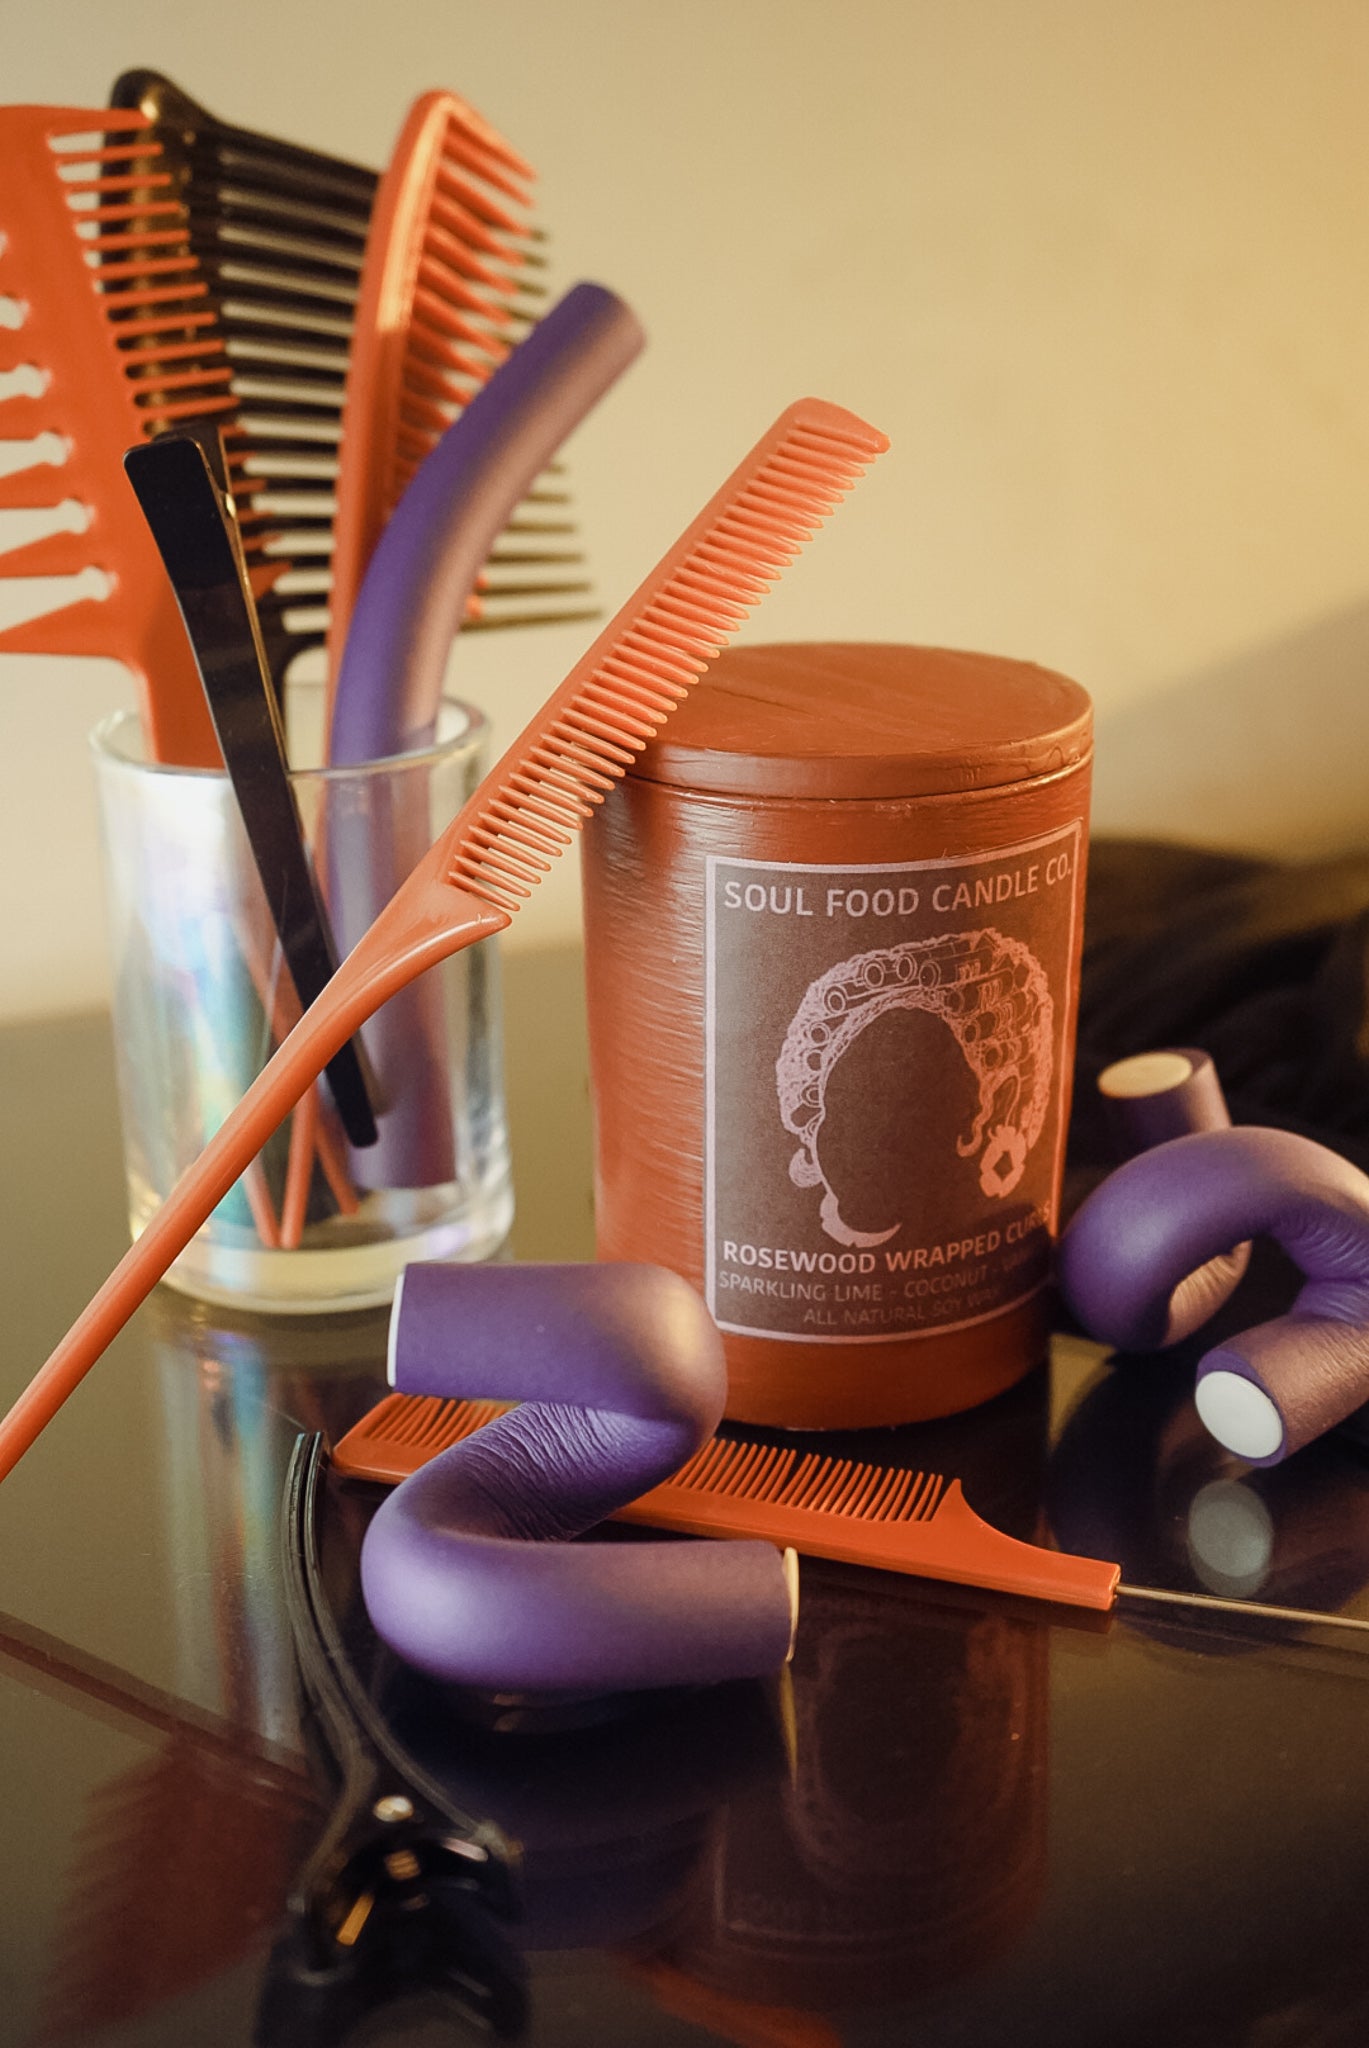 Rosewood Wrapped Curls - Soul Food Candle Company